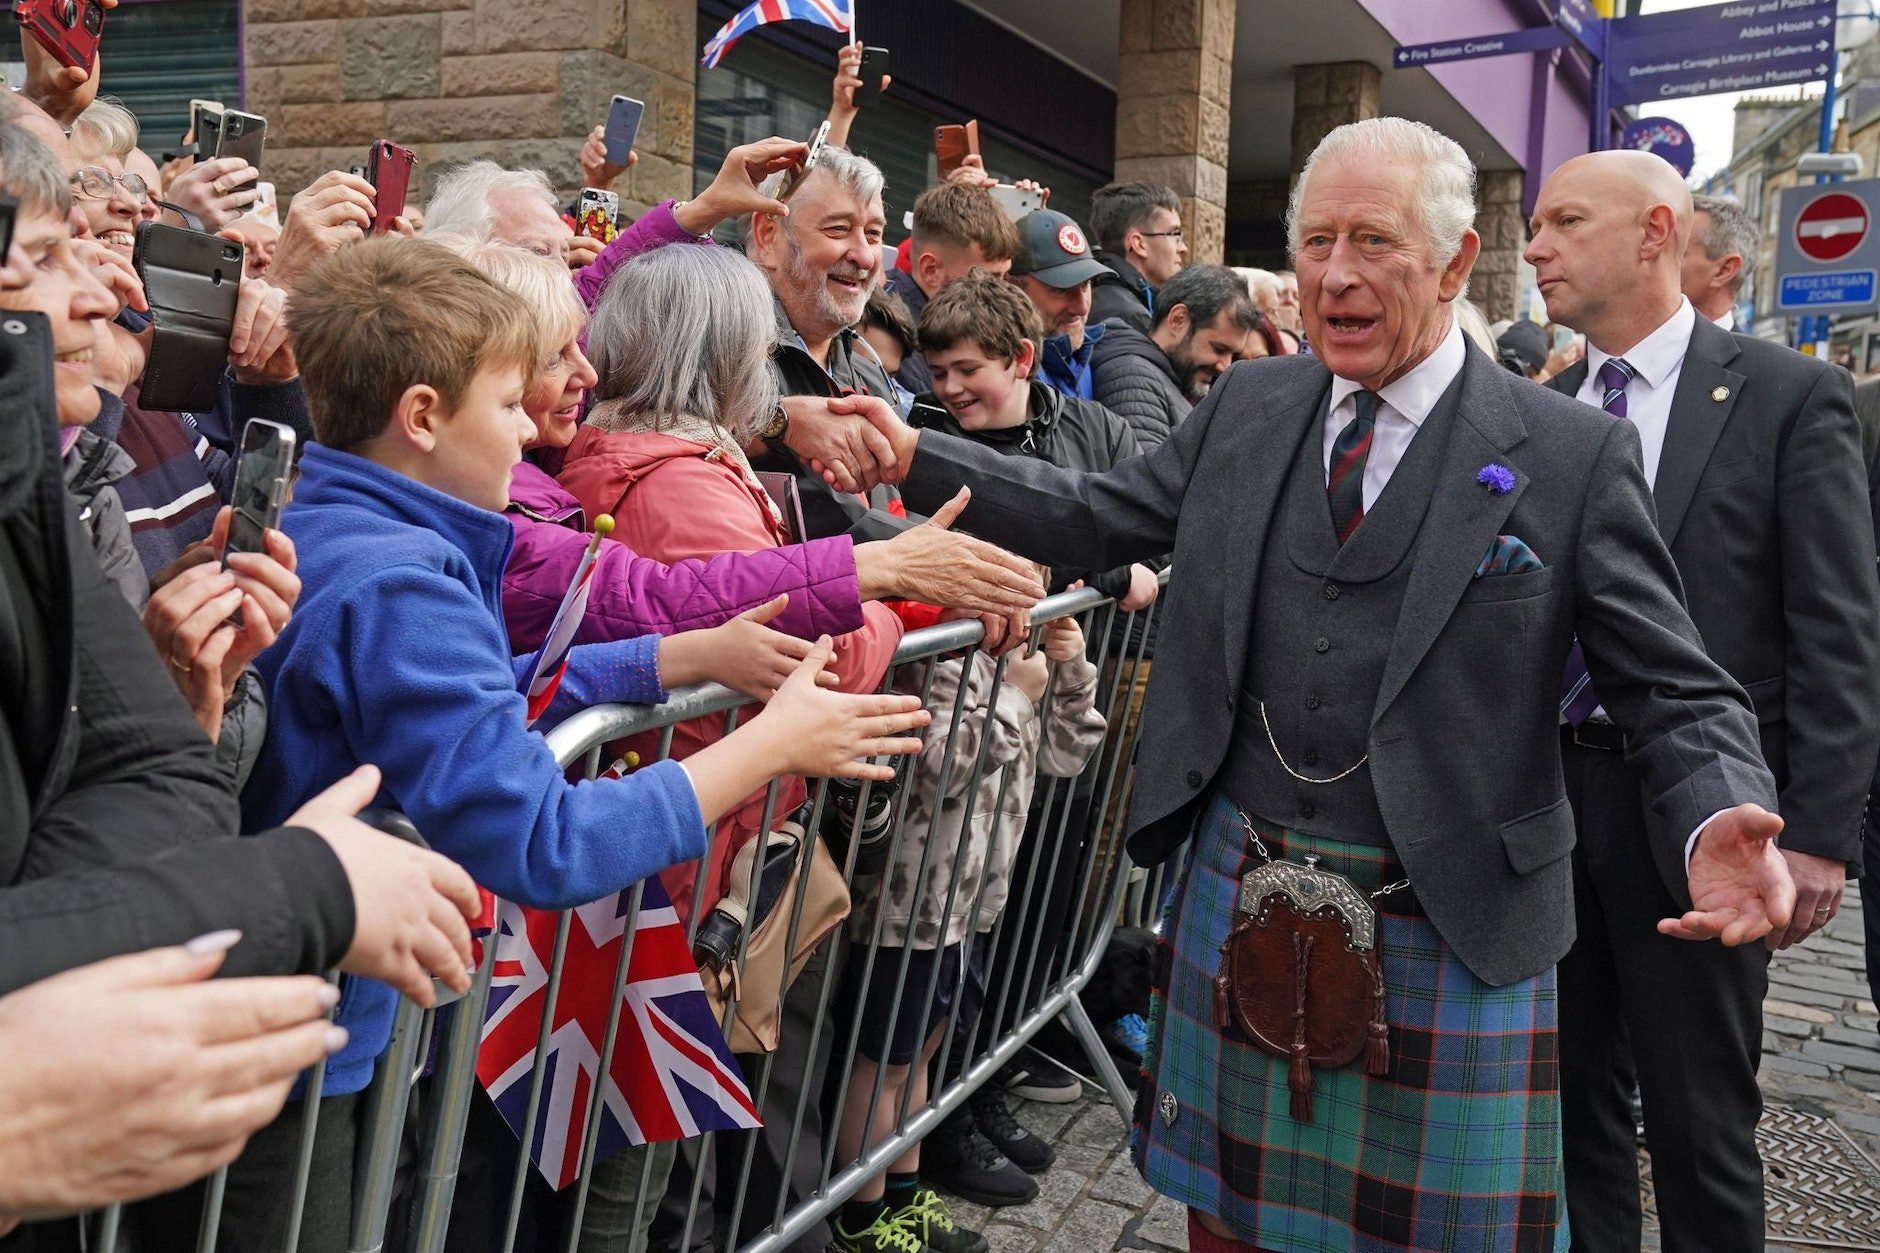 King Charles III on his arrival for an official council meeting at the City Chambers in Dunfermline, Fife.  